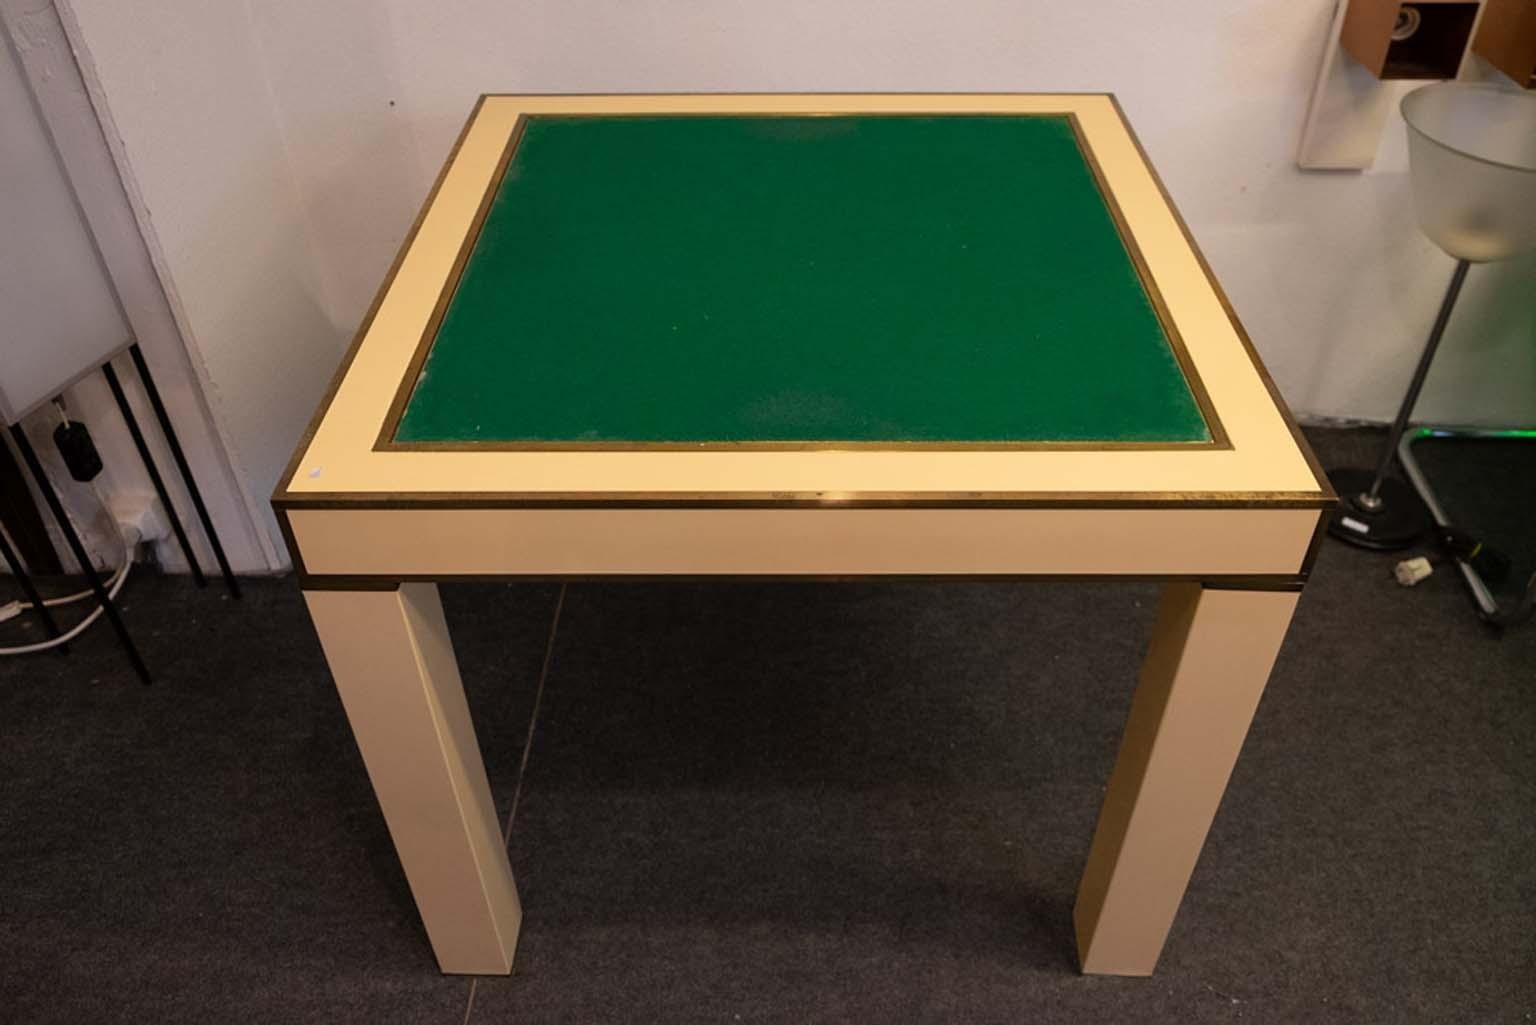 Lacquered ivory and brass game table designed by Jean-Claude Mahey for the Maison Romeo in the 1970s.
This table was produced only on request and in very limited numbers. The chess board is removable and reveals a backgammon game, or can be flipped